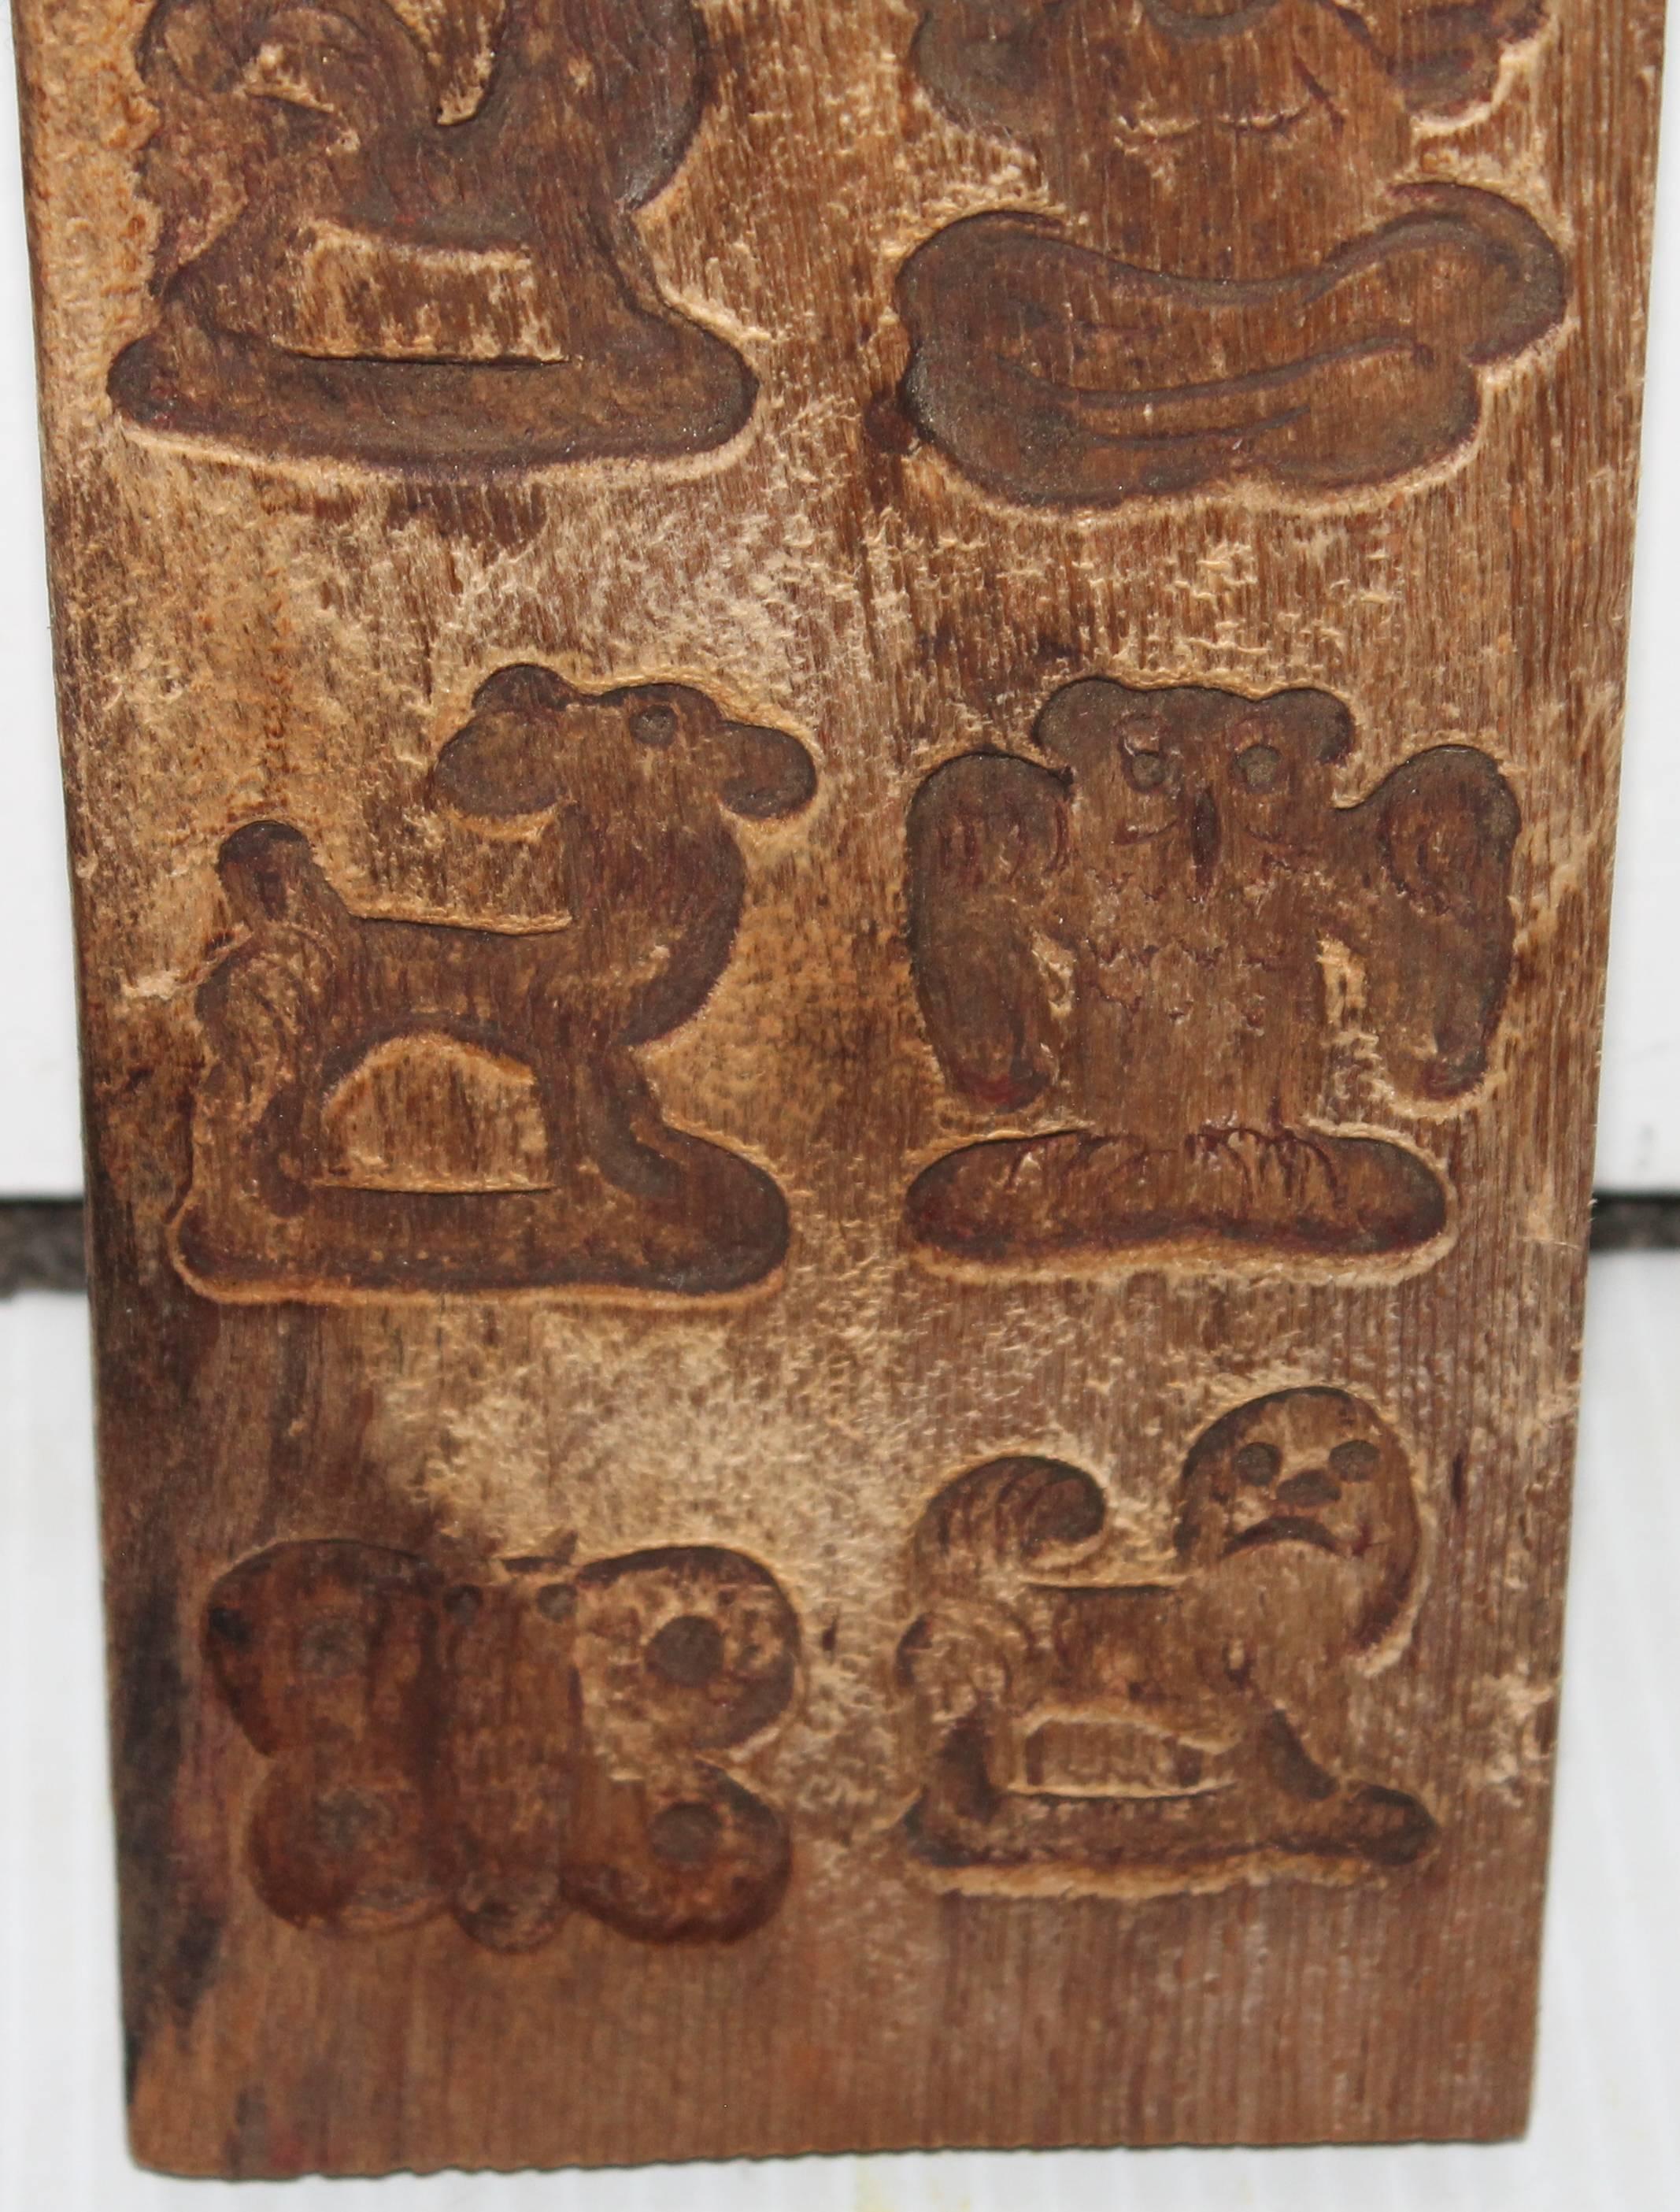 Carved 19th Century Wood Chocolate Mold from New England